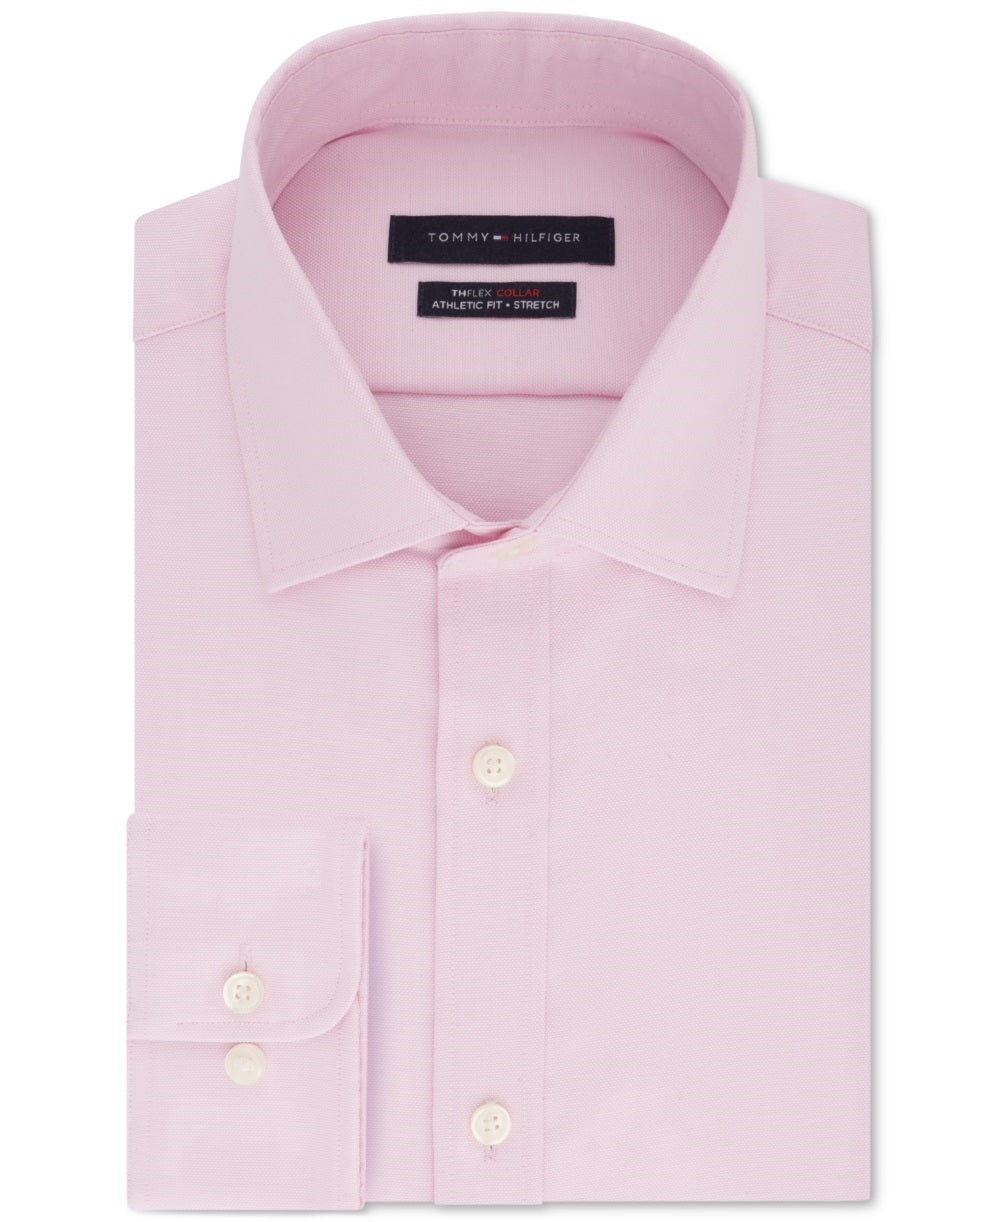 Tommy Hilfiger Men's Athletic Fit Performance Stretch Th Flex Collar Solid Dress Shirt Pink Size 16X34X35